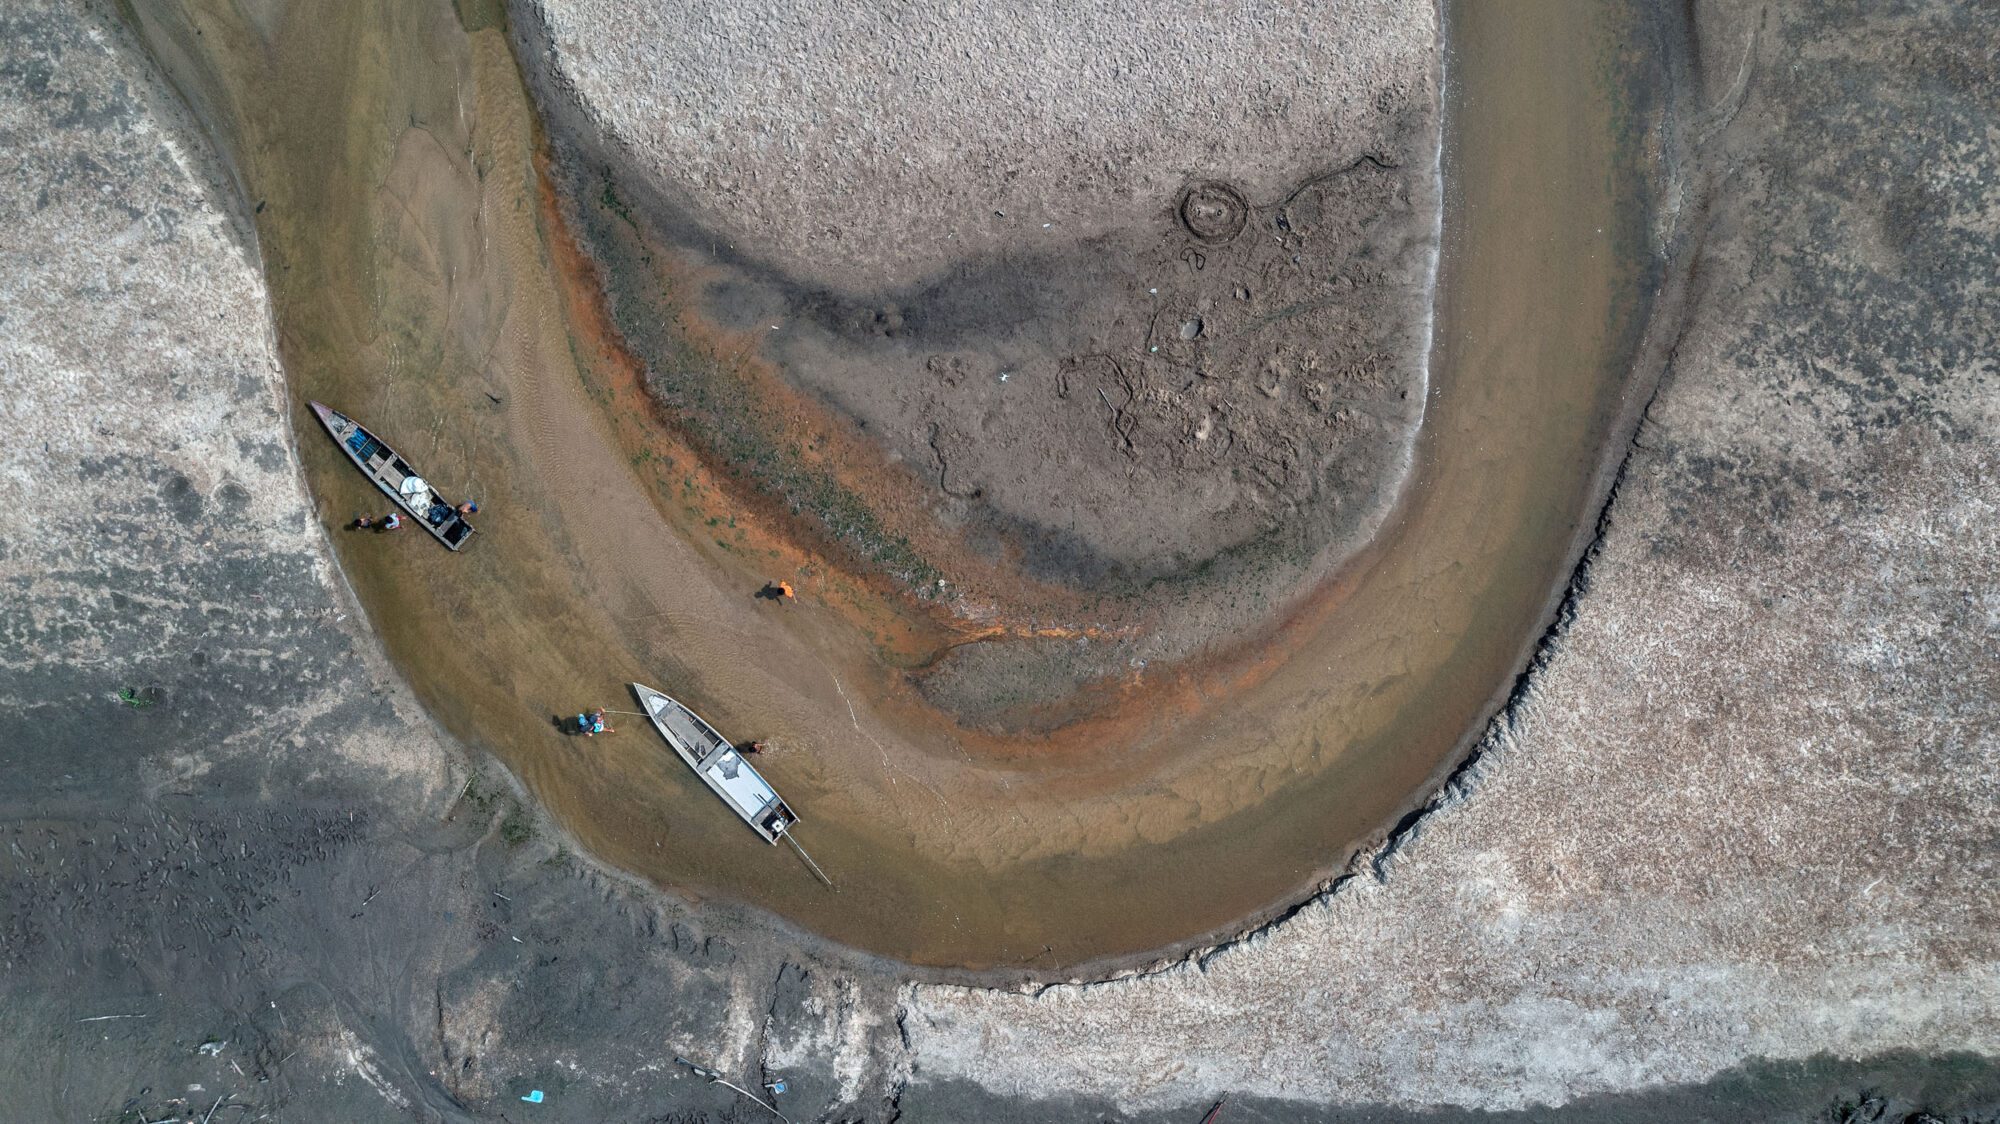 A dried out riverbed U-bend in brown with no vegetation or any signs of life around it holds two boats which have been beached in the sand of the riverbed